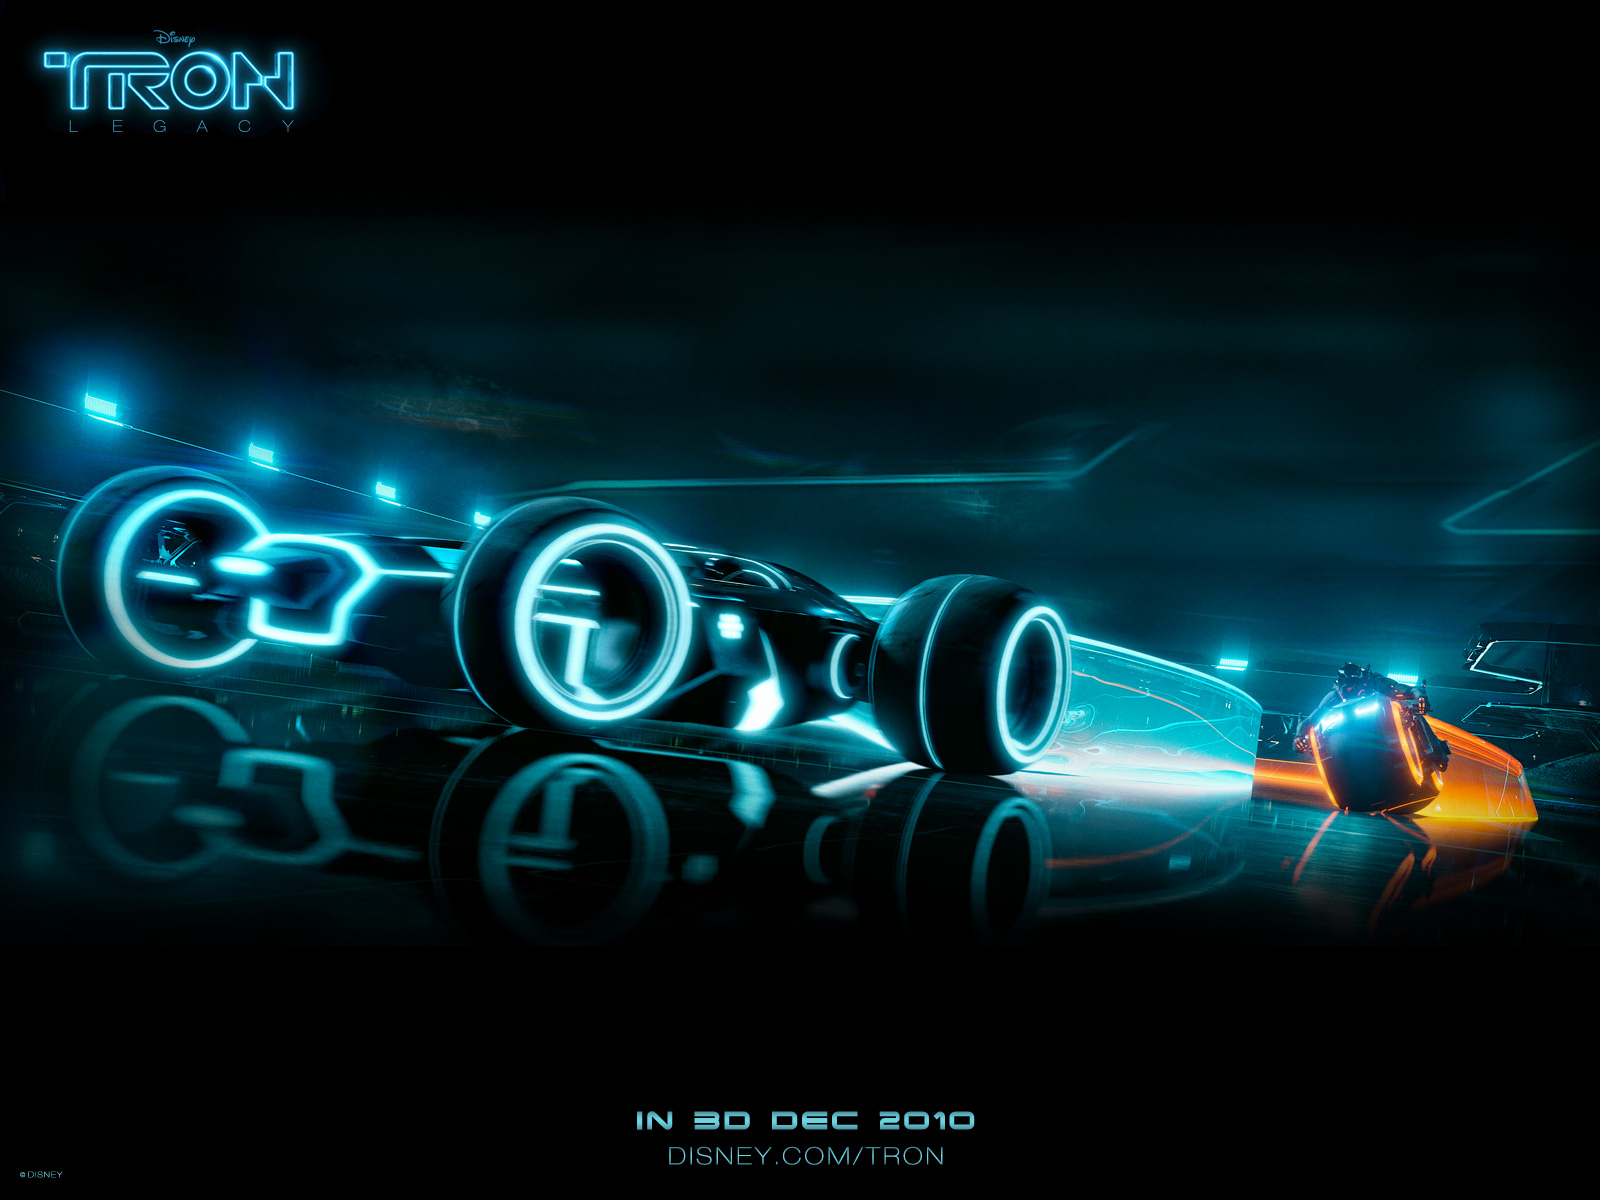 Light Cycle and Car Race from Disneys Tron Legacy Desktop Wallpaper